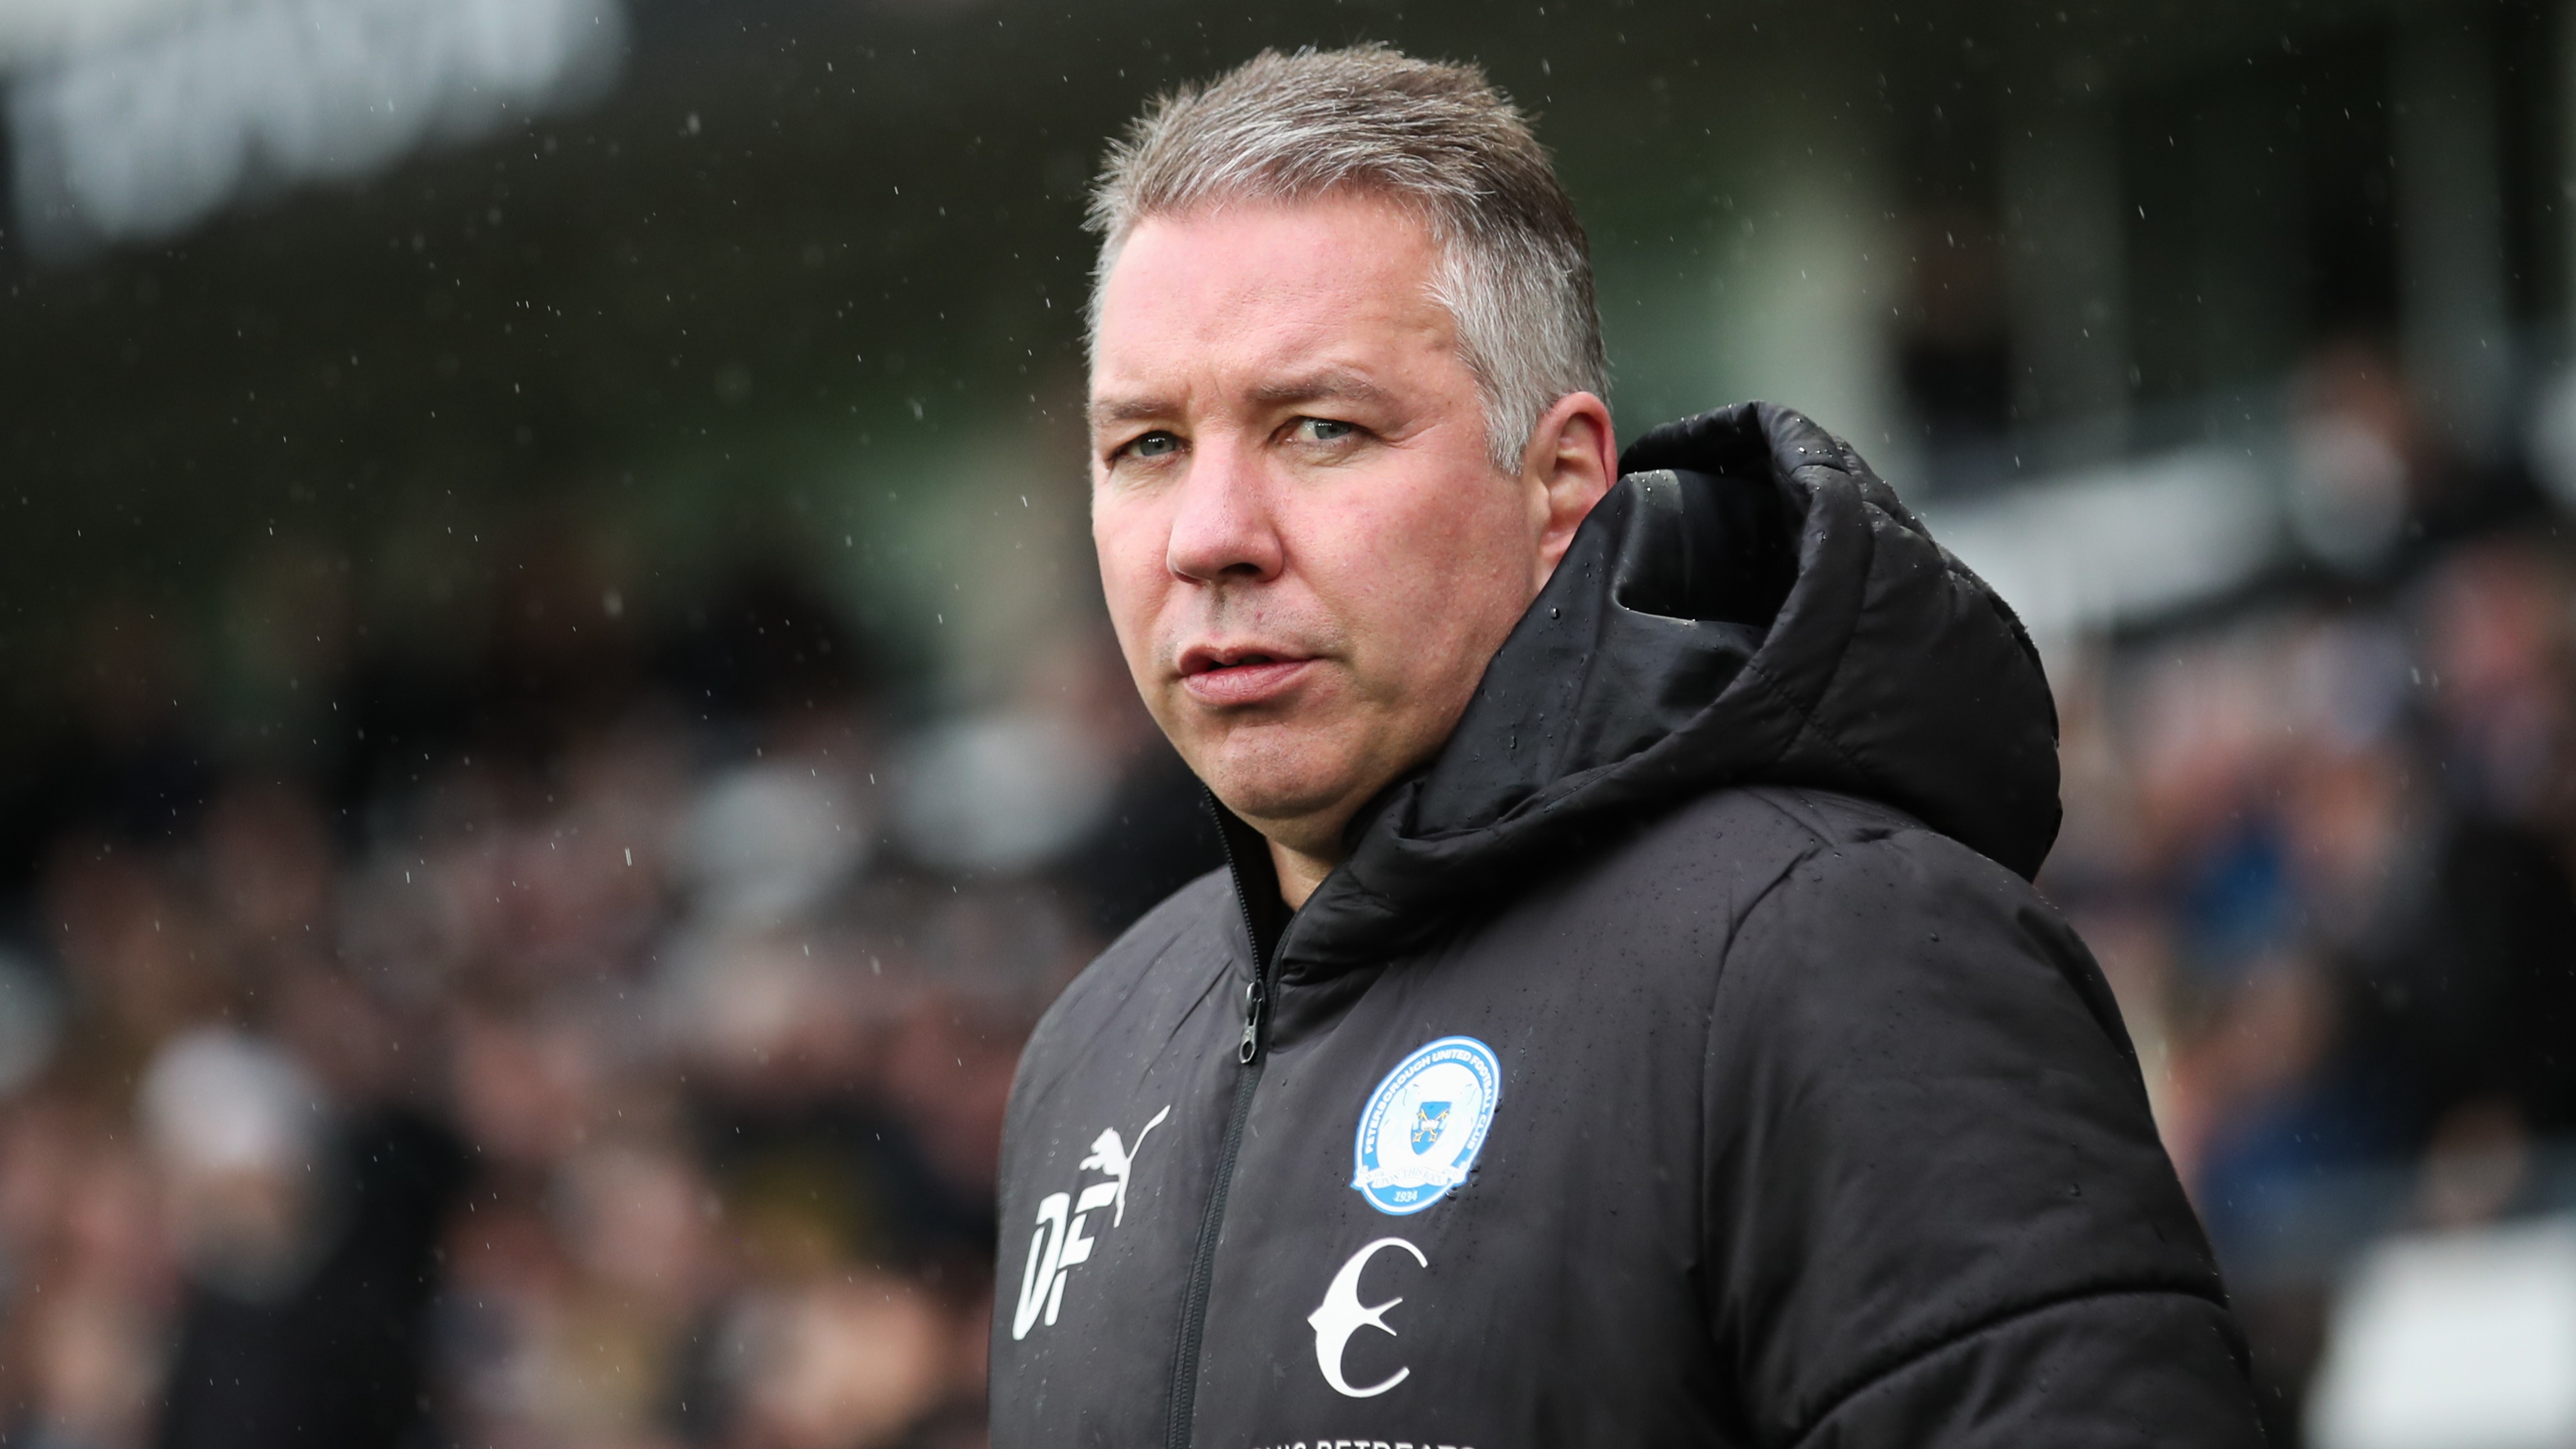 Darren Ferguson resigns as Peterborough United manager in wake of Derby defeat | ITV News Anglia